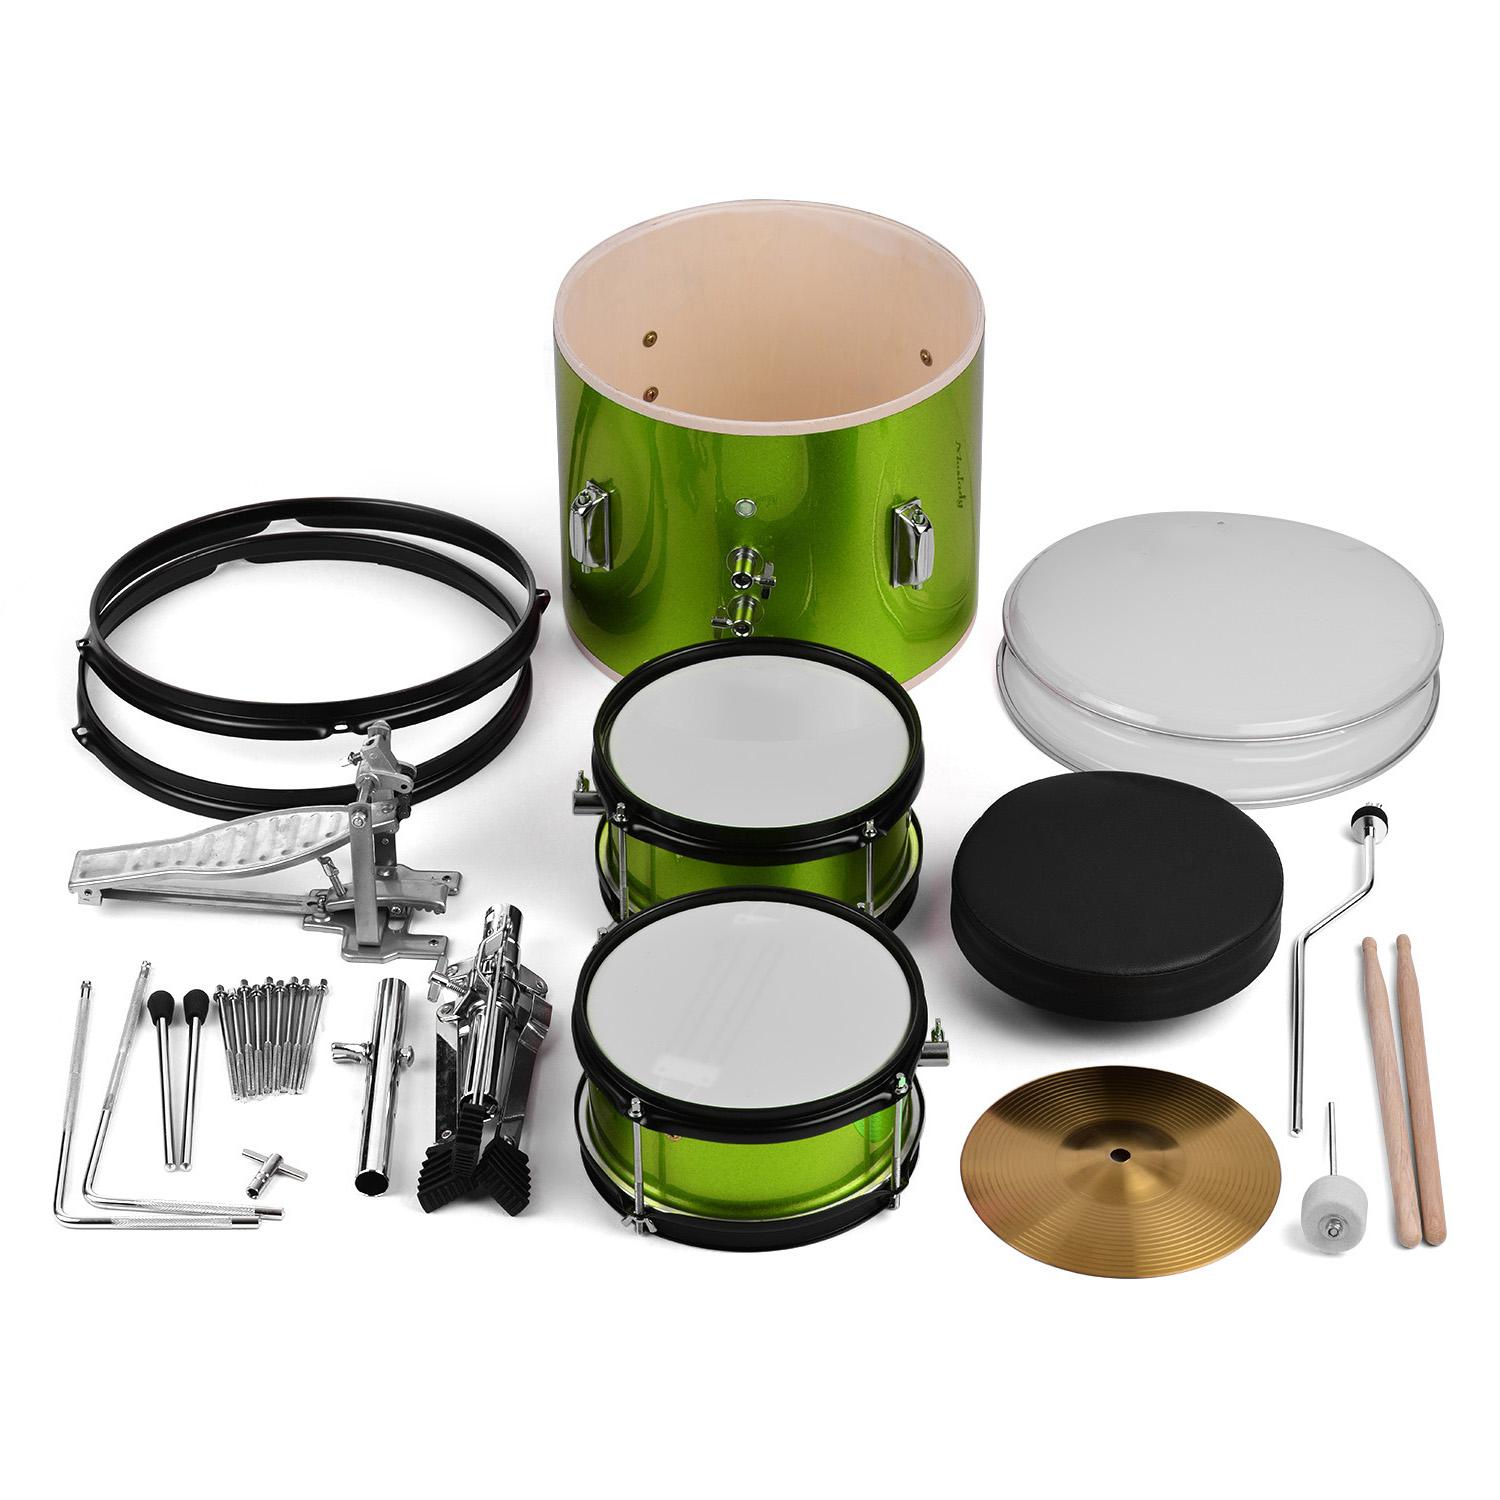 TOMTOP JMS Kids Children Junior Beginners 3-Piece Drum Set Drums Kit Percussion Musical Instrument with Cymbal